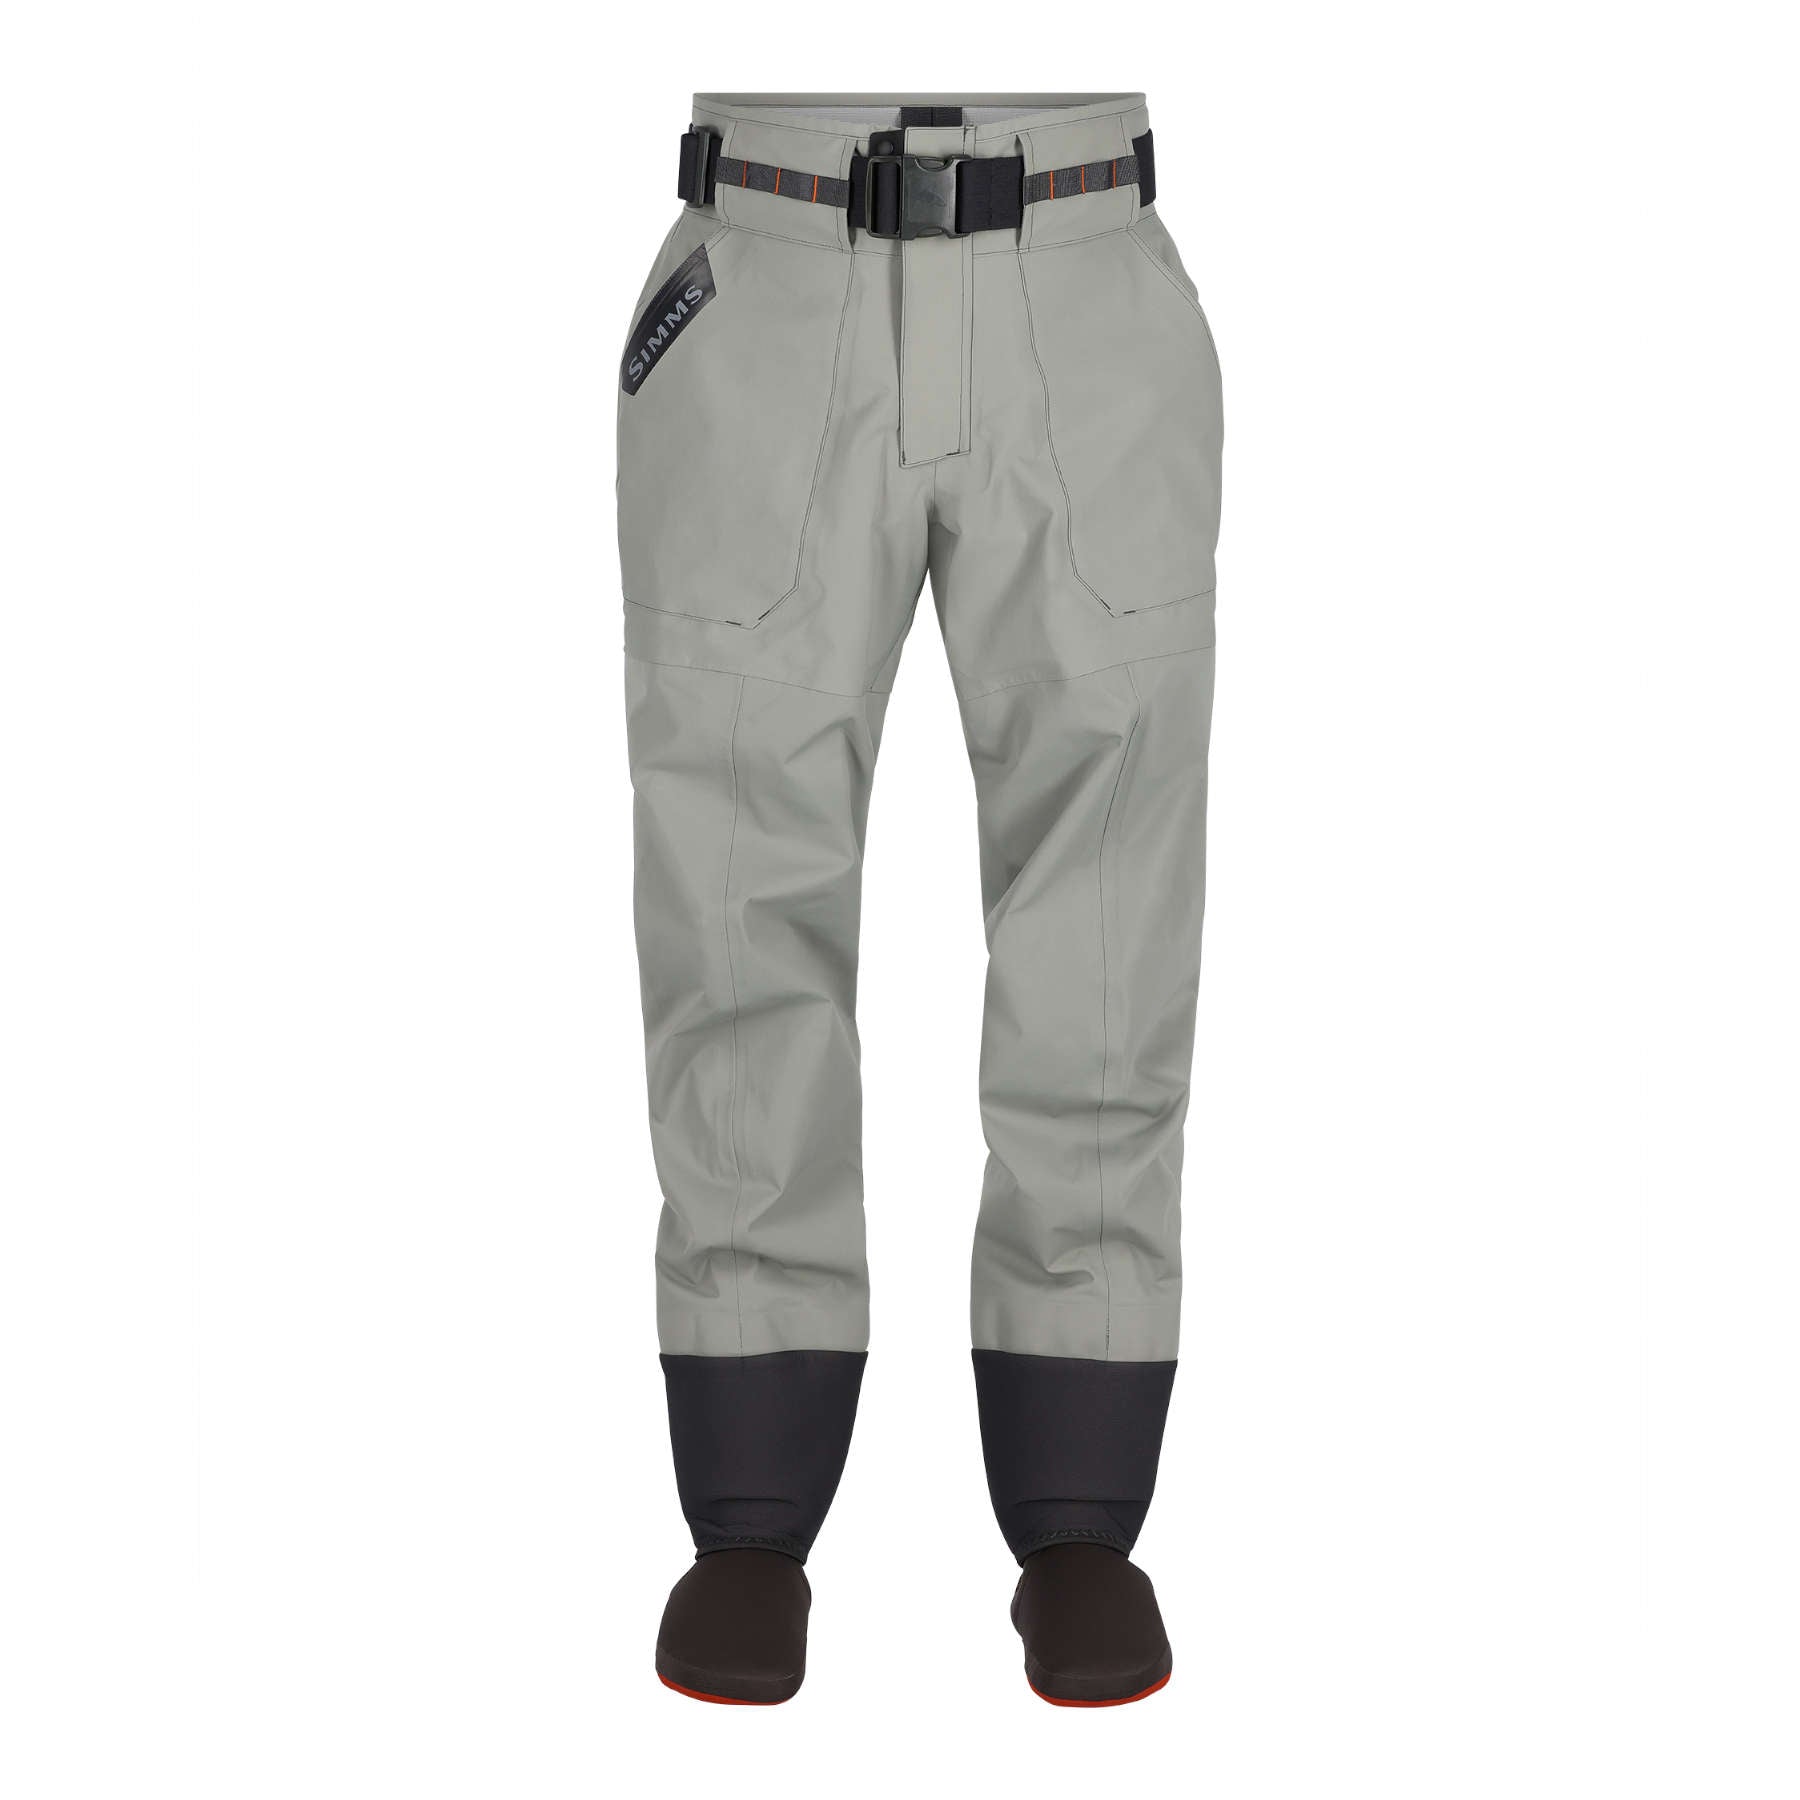 Fly Fishing Waist Waders Pant Durable Waterproof Trousers Wading Breathable  Waist Pants With Stocking Foot